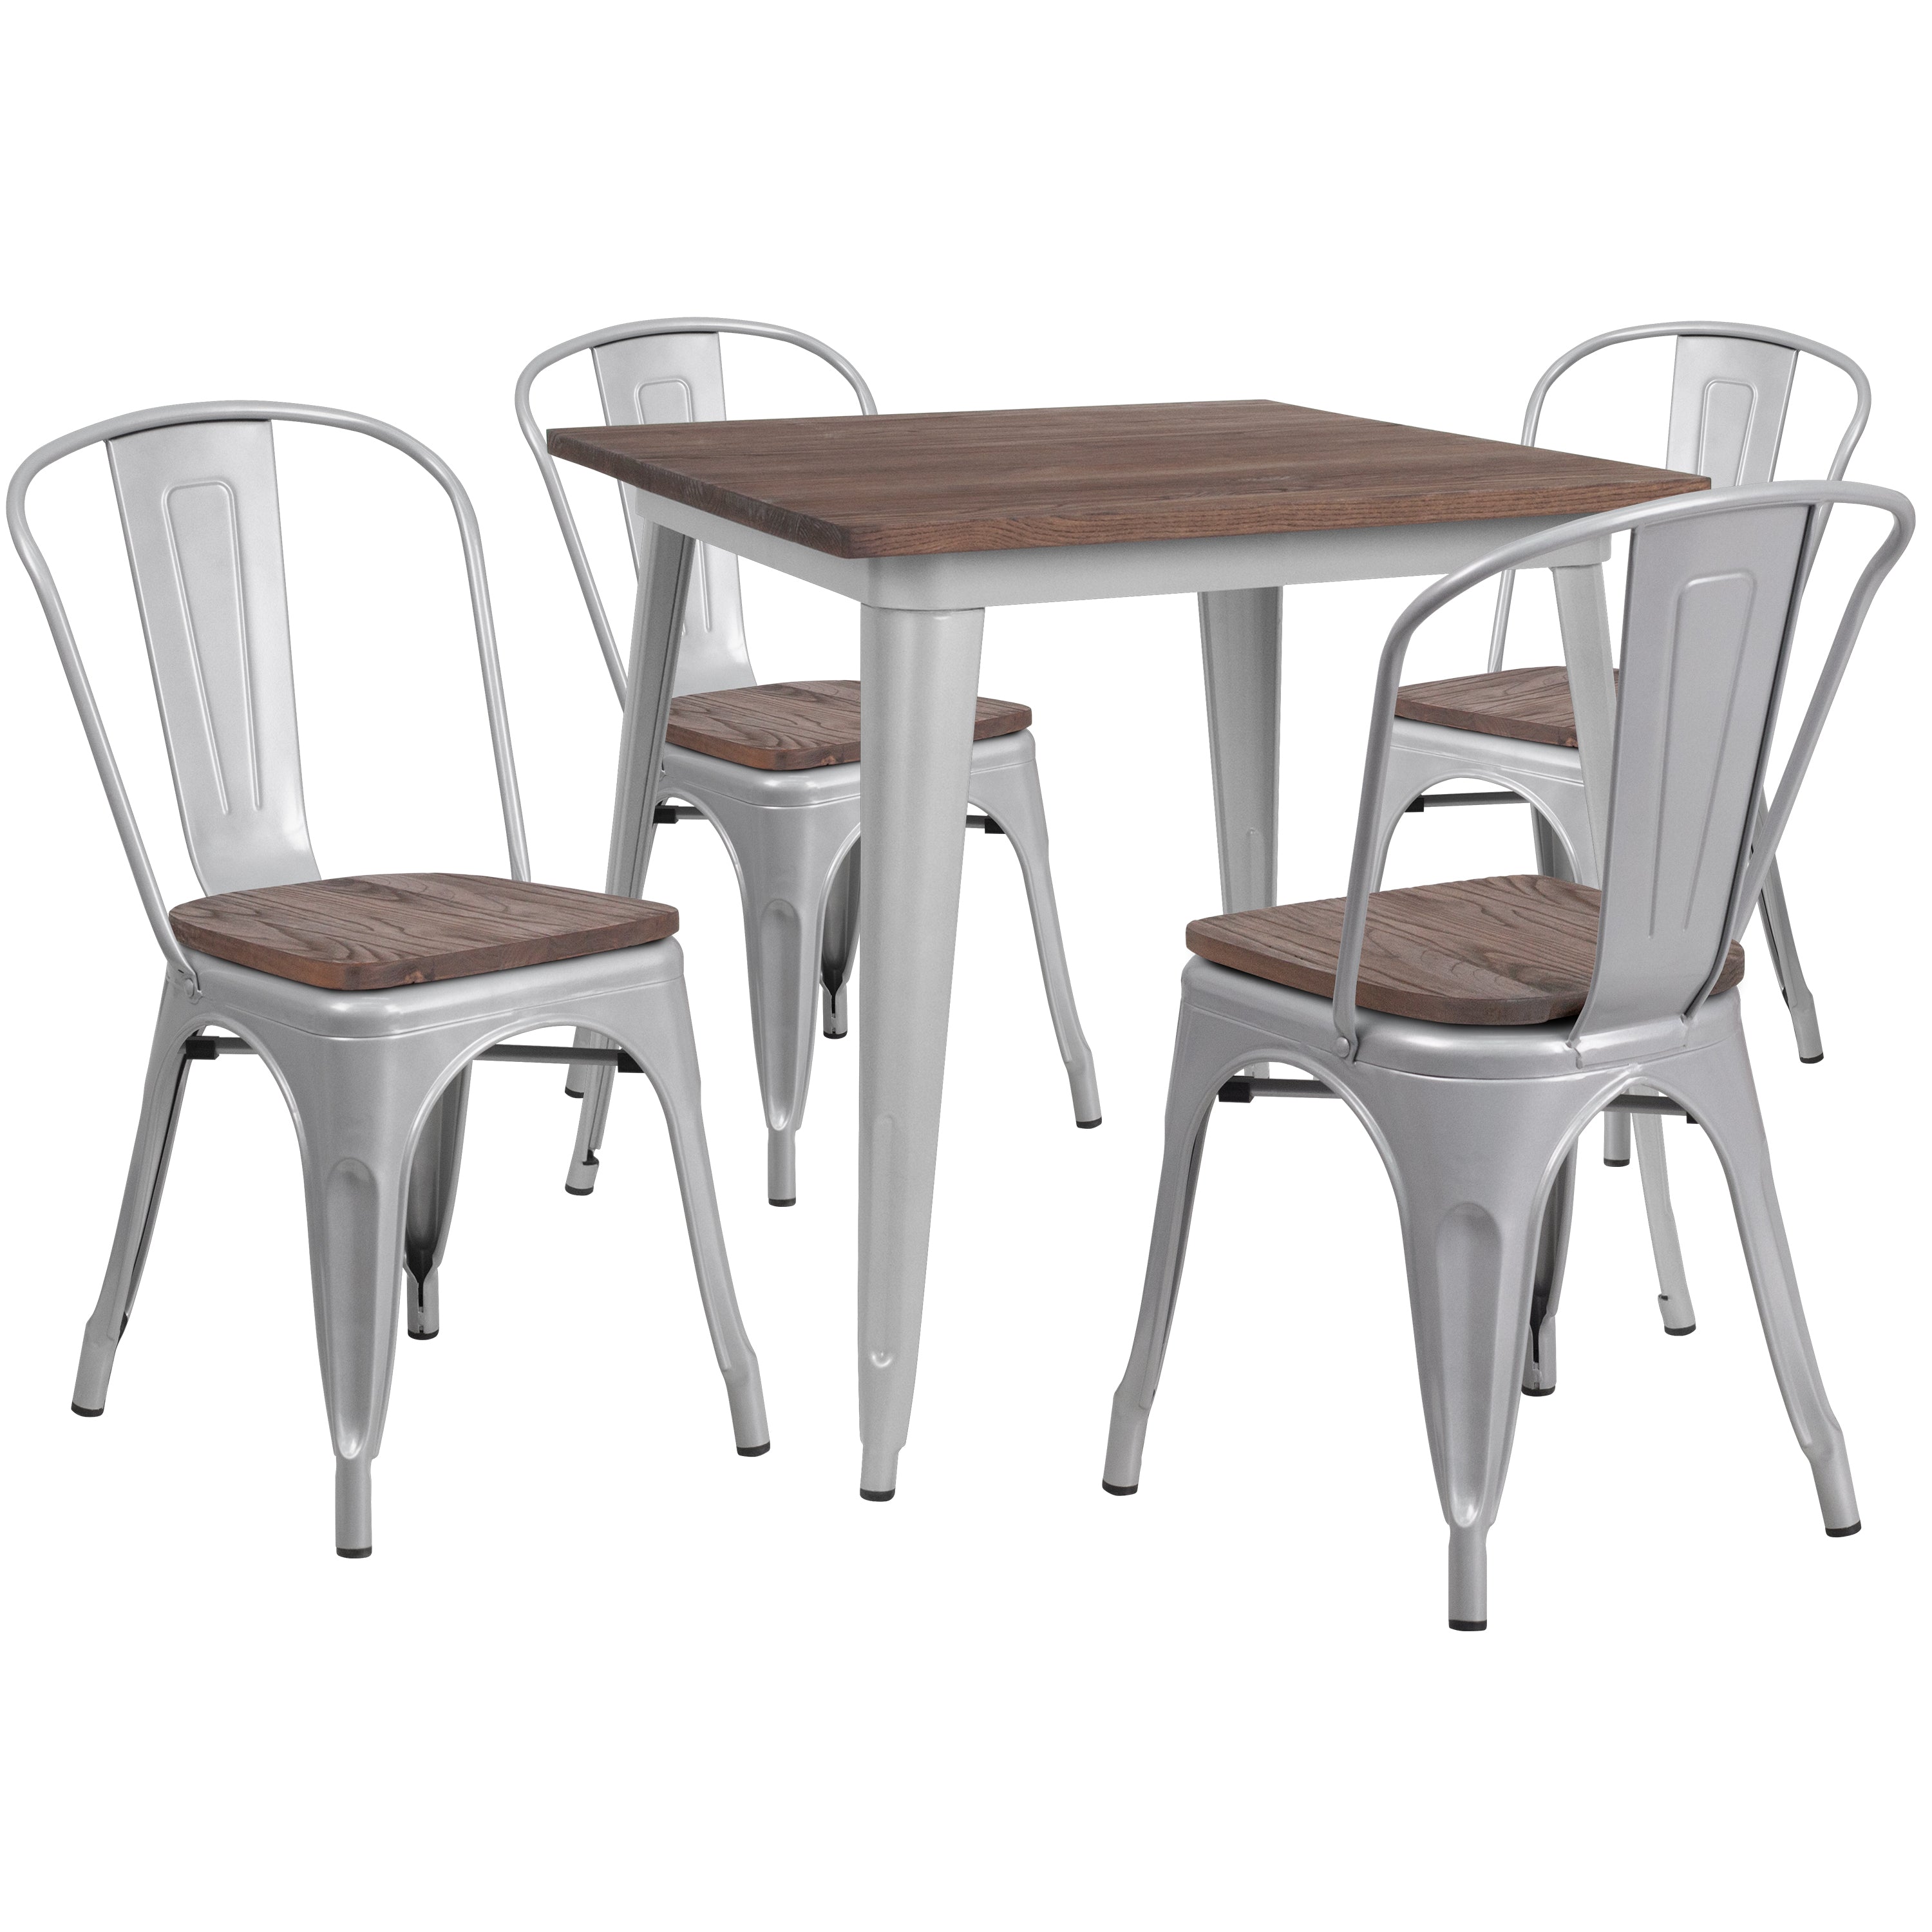 31.5" Square Metal Table Set with Wood Top and 4 Stack Chairs-Metal/ Colorful Table and Chair Set-Flash Furniture-Wall2Wall Furnishings